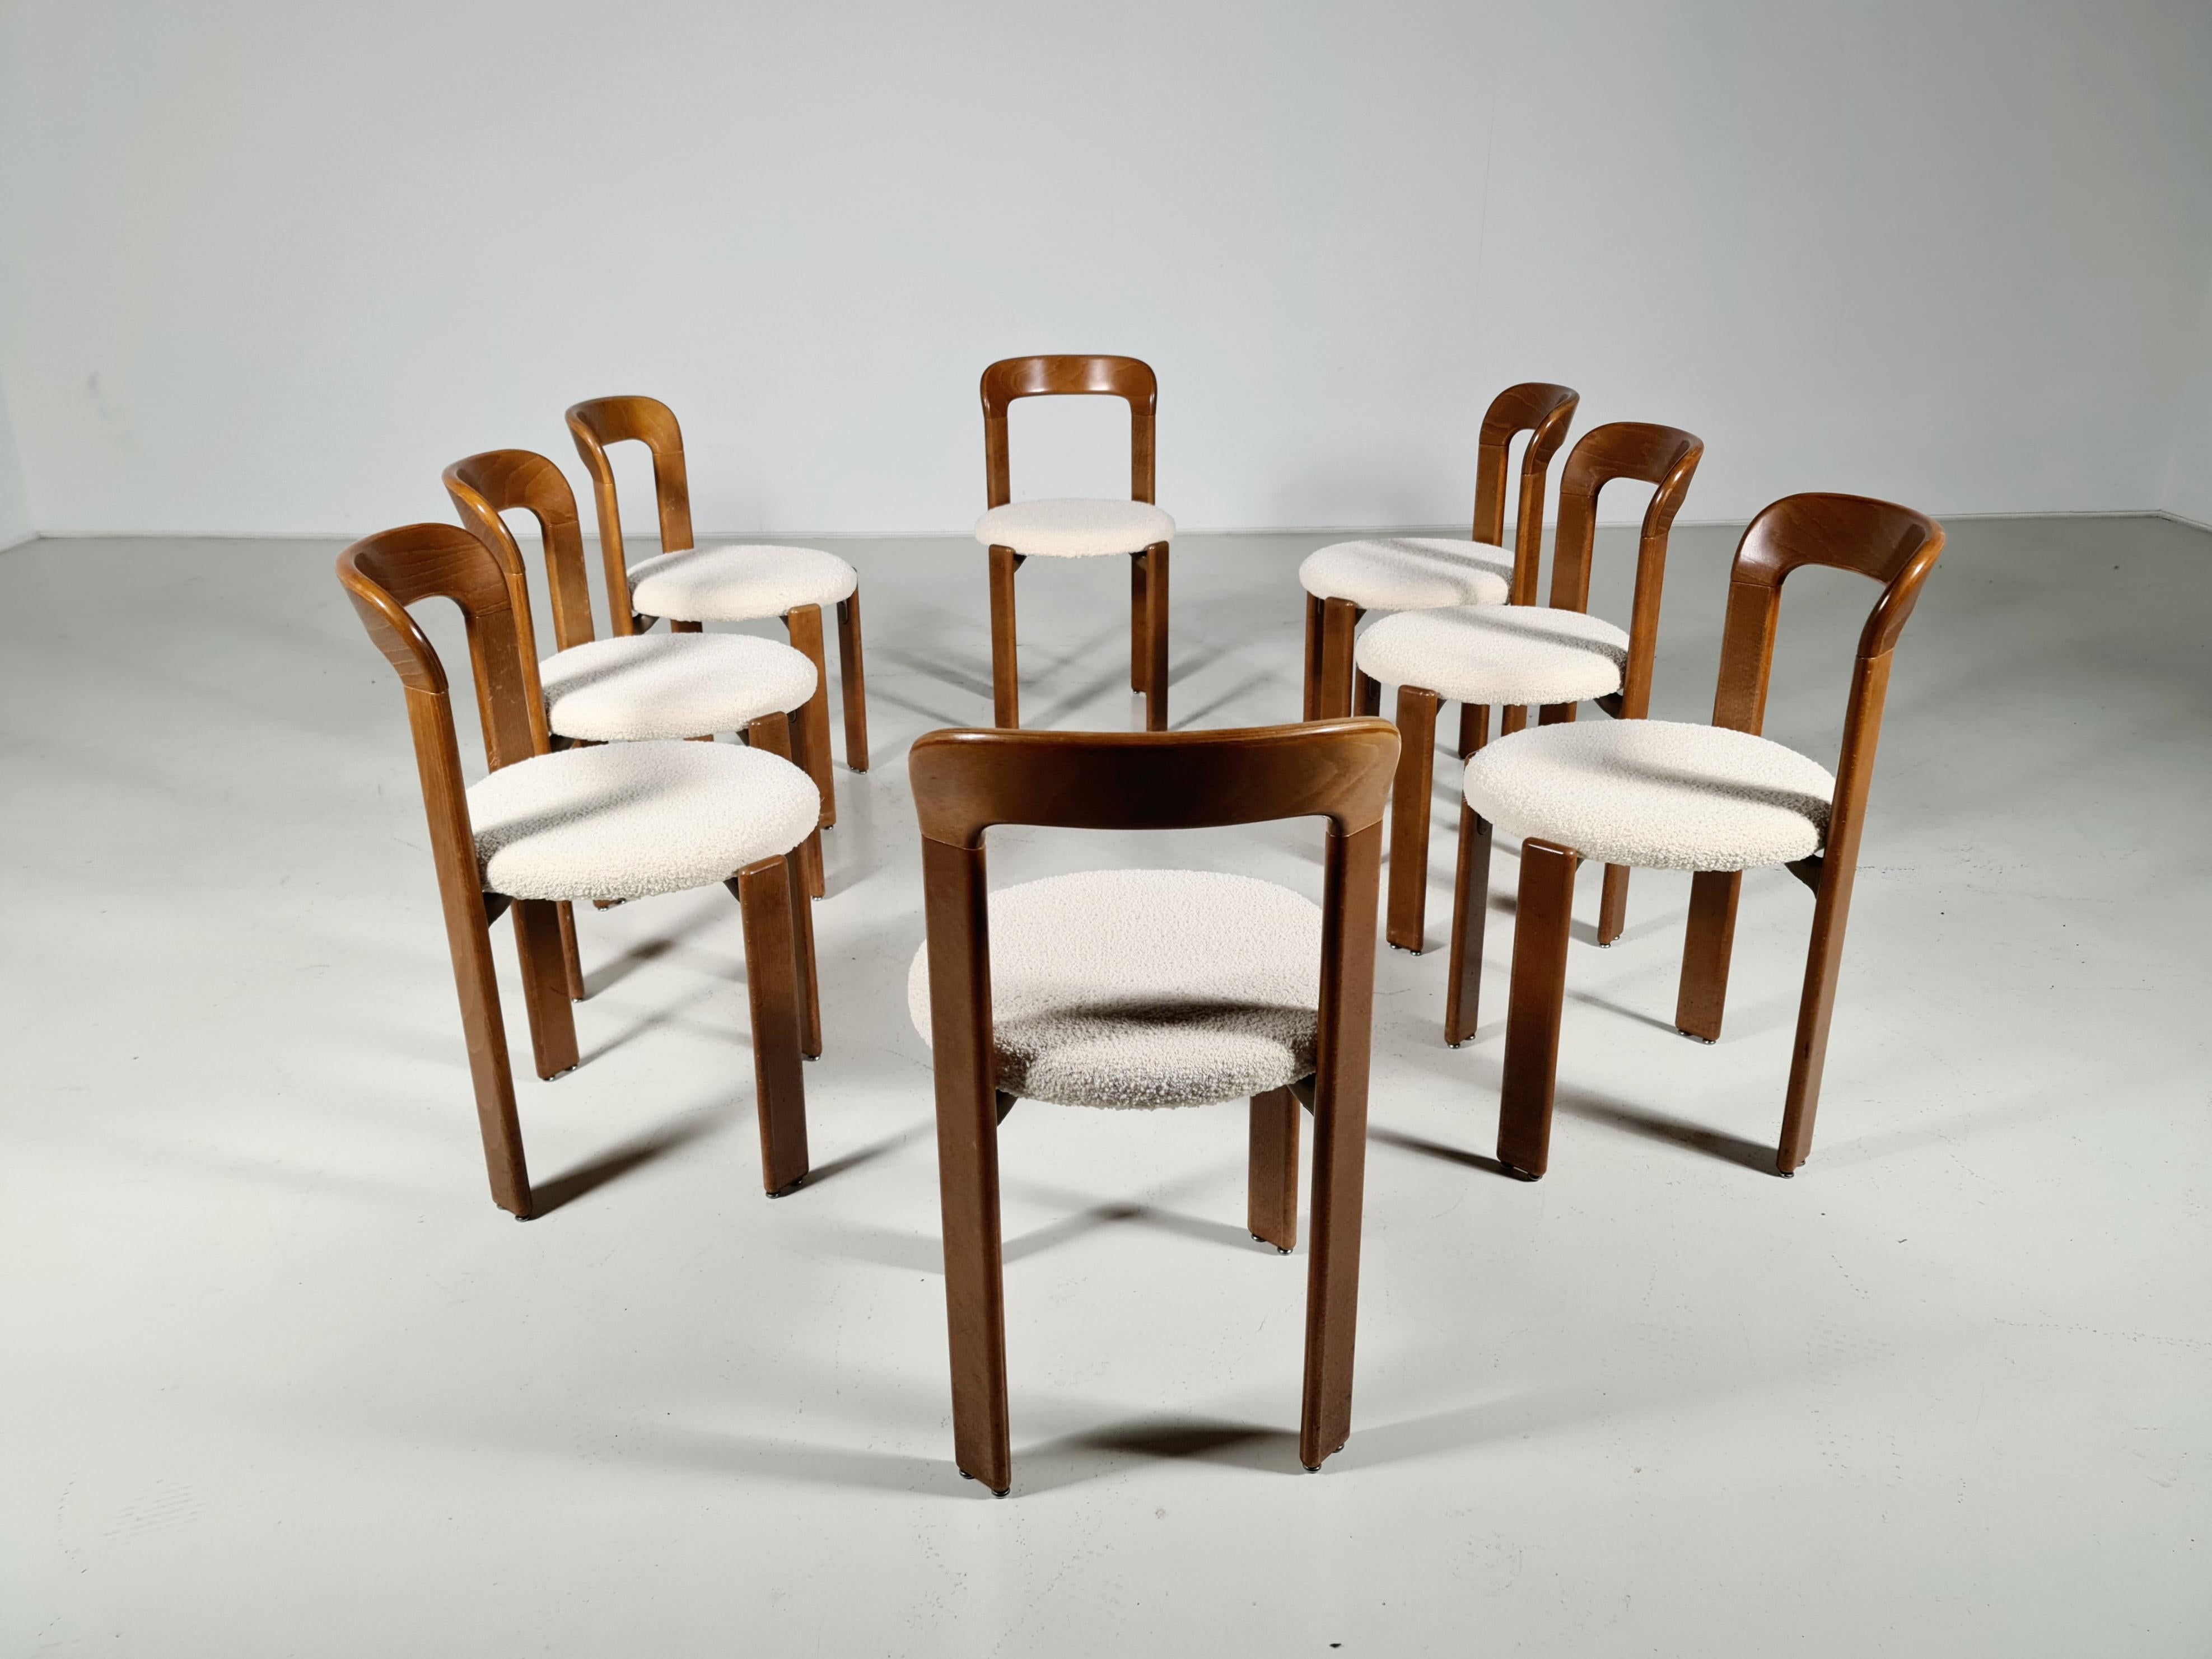 Set of 8 Bruno Rey vintage dining chairs, Switzerland, 1970. Made of beechwood and reupholstered in a boucle fabric.

Referred to as 